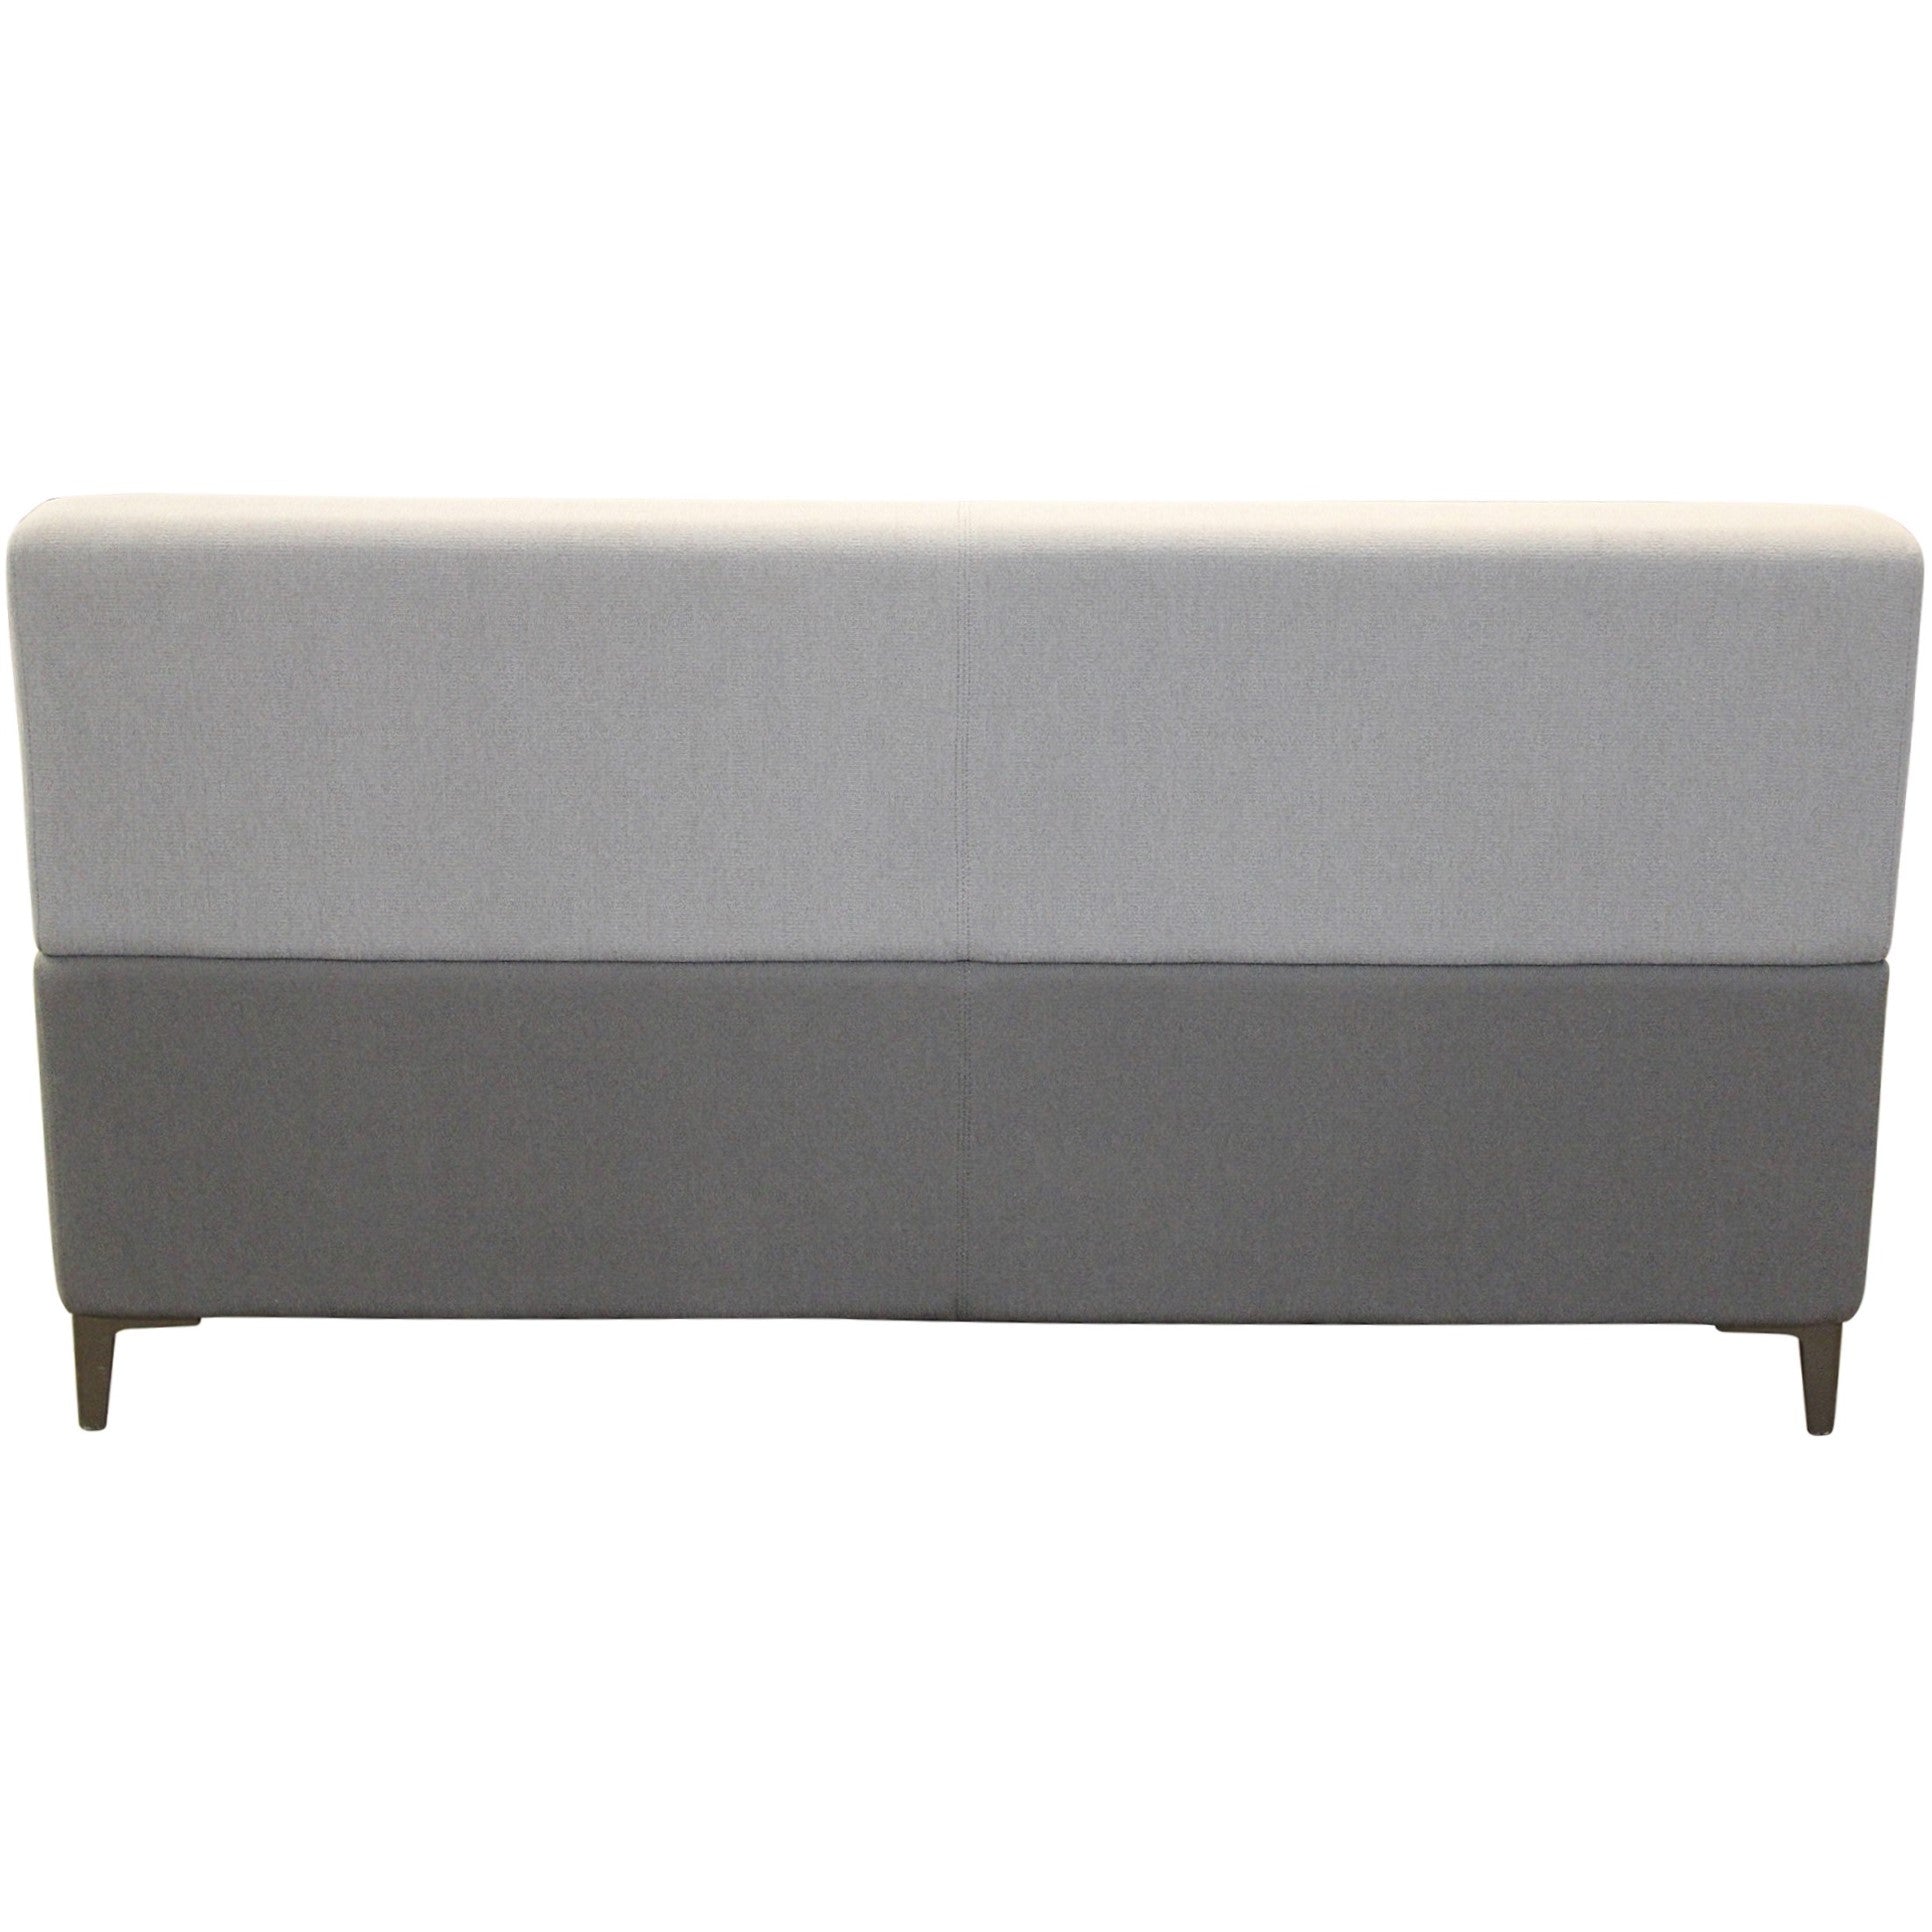 Stylex Share Two-Seater Sofa, Grey - Preowned